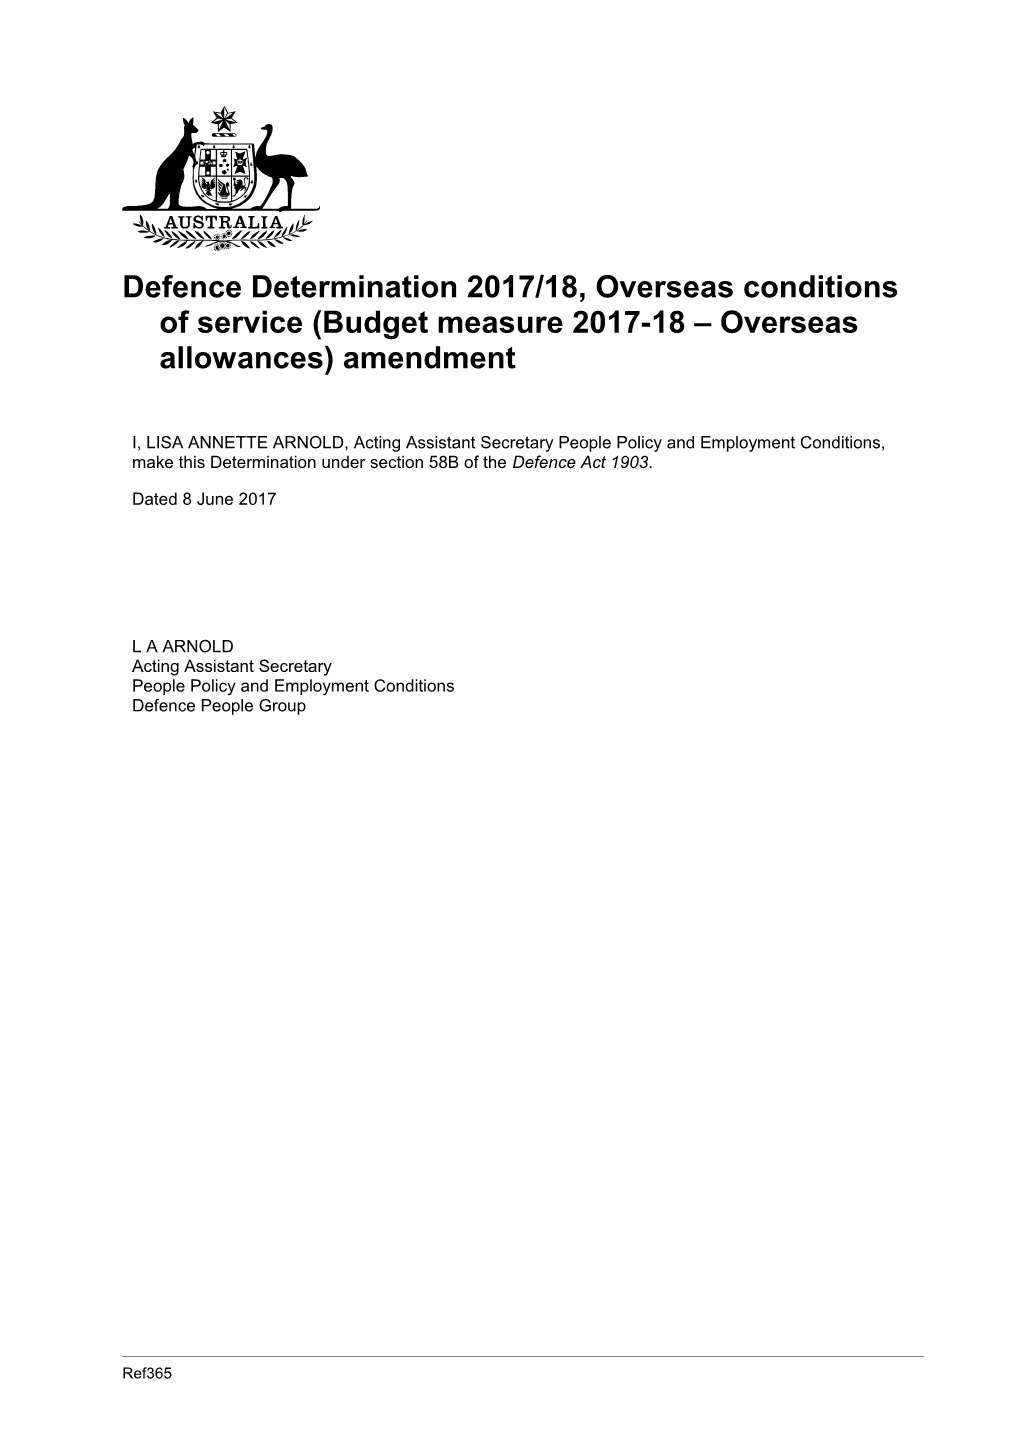 Defence Determination 2017/18, Overseas Conditions of Service (Budget Measure 2017-18 Overseas